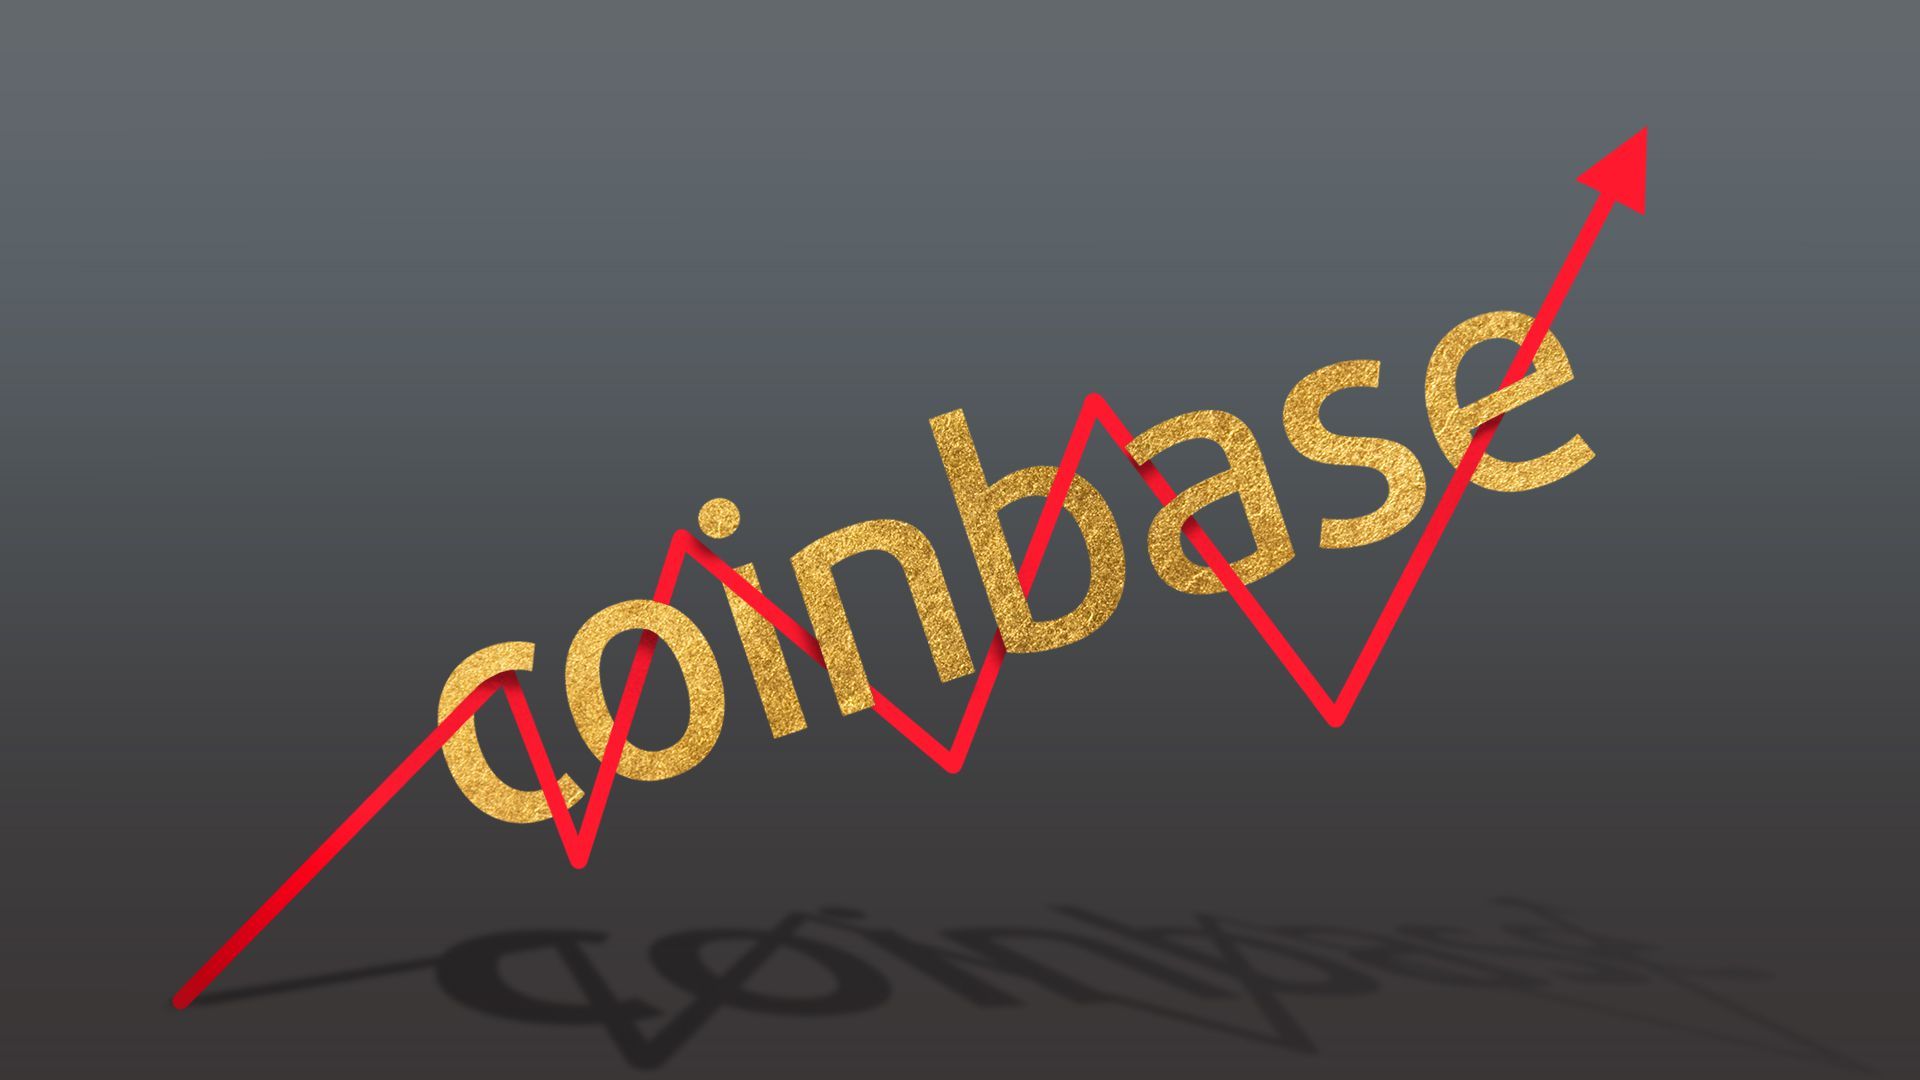 Illustration of the Coinbase logo being lifted by a stock trend line